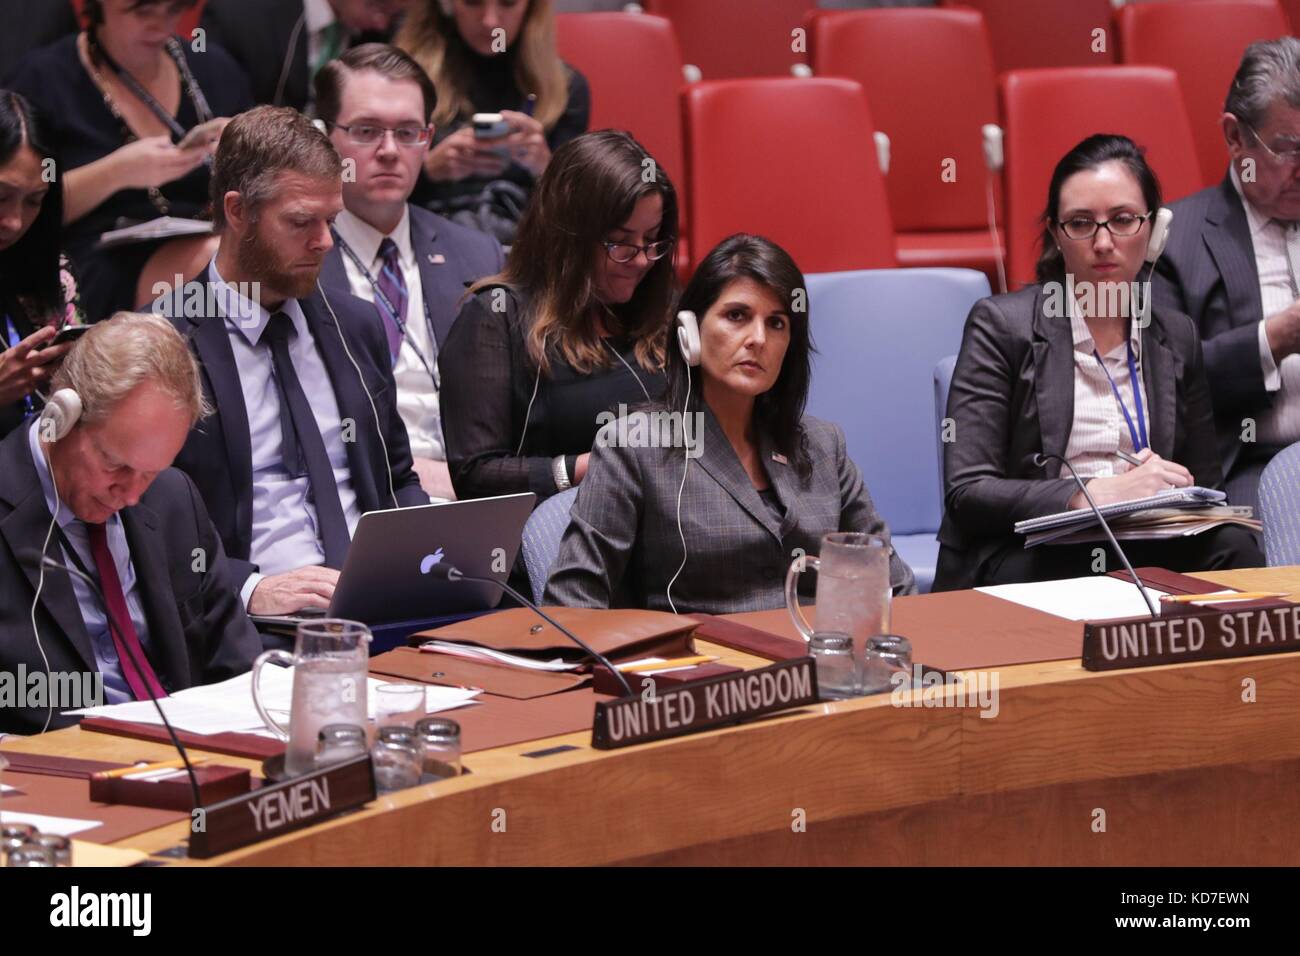 United Nations, New York, USA, October 10 2017 - British UN Ambassador Matthew Rycroft and Nikki R. Haley, United States Permanent Representative to the UN During a Security Council meeting on Yemen today at the UN Headquarters in New York. Photo: Luiz Rampelotto/EuropaNewswire | usage worldwide Stock Photo